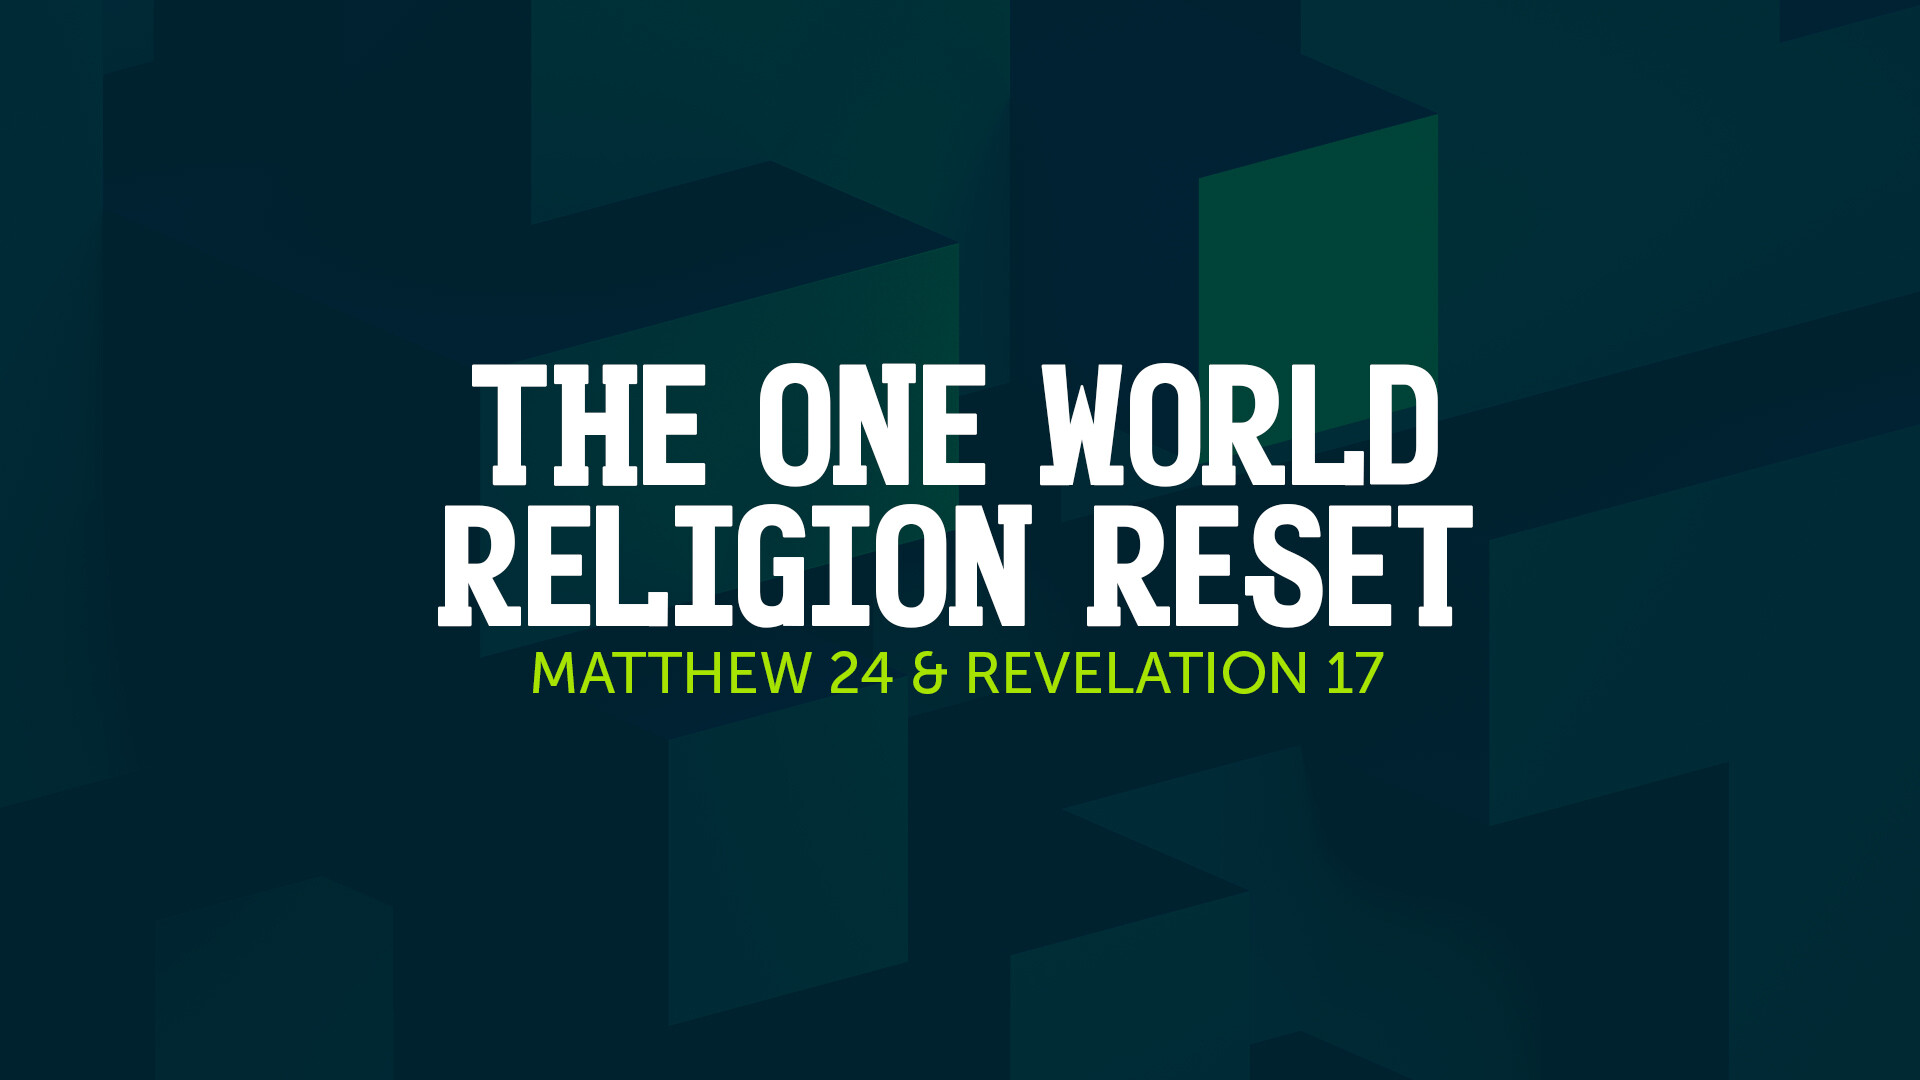 The One World Religion Reset